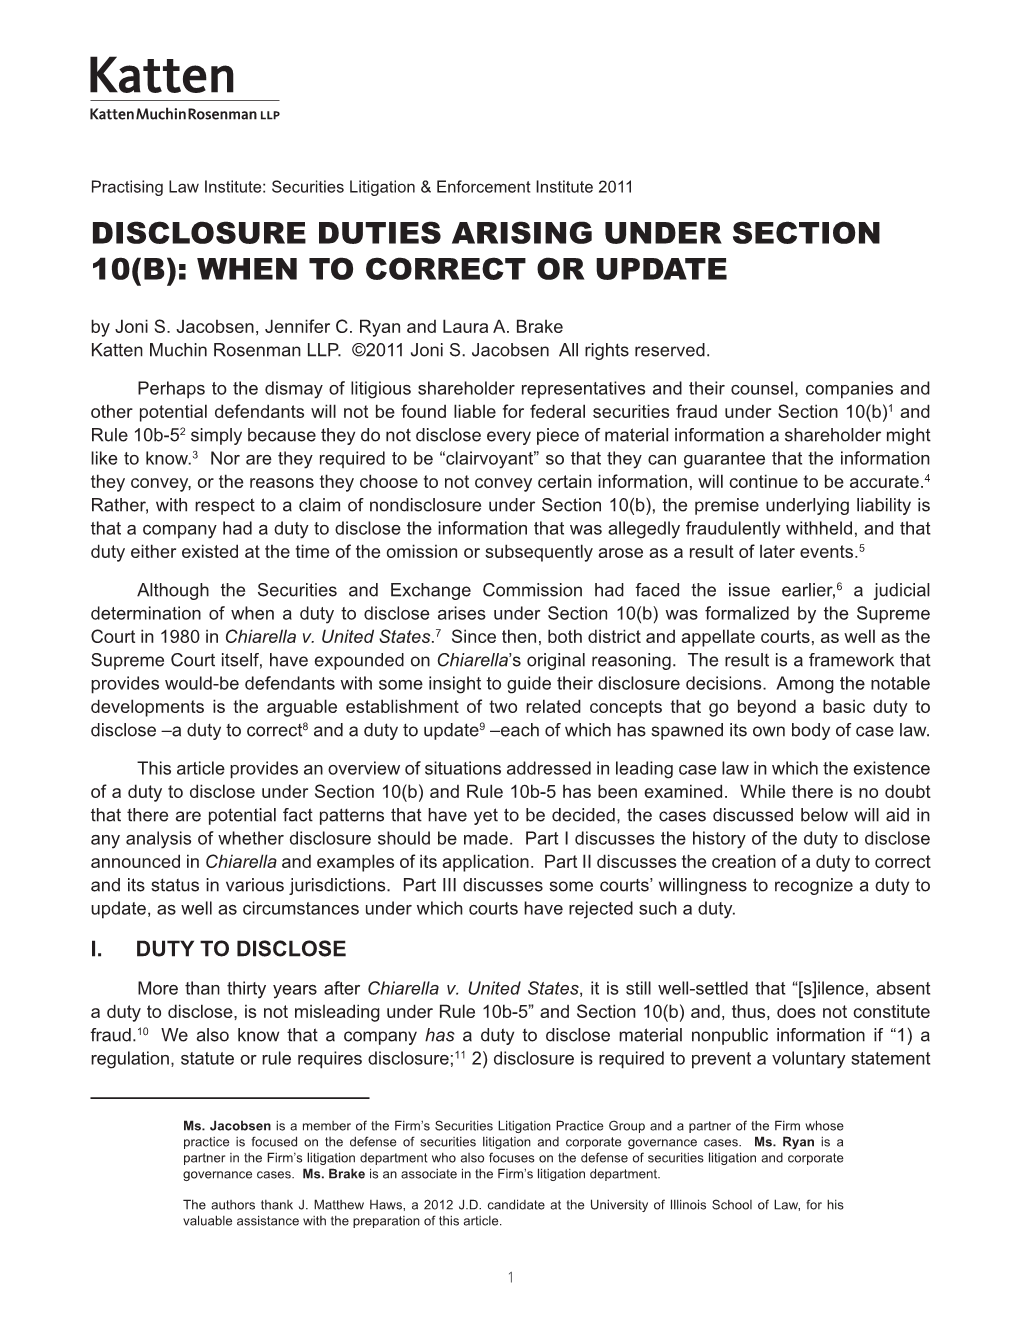 DISCLOSURE DUTIES ARISING UNDER SECTION 10(B): WHEN to CORRECT OR UPDATE by Joni S